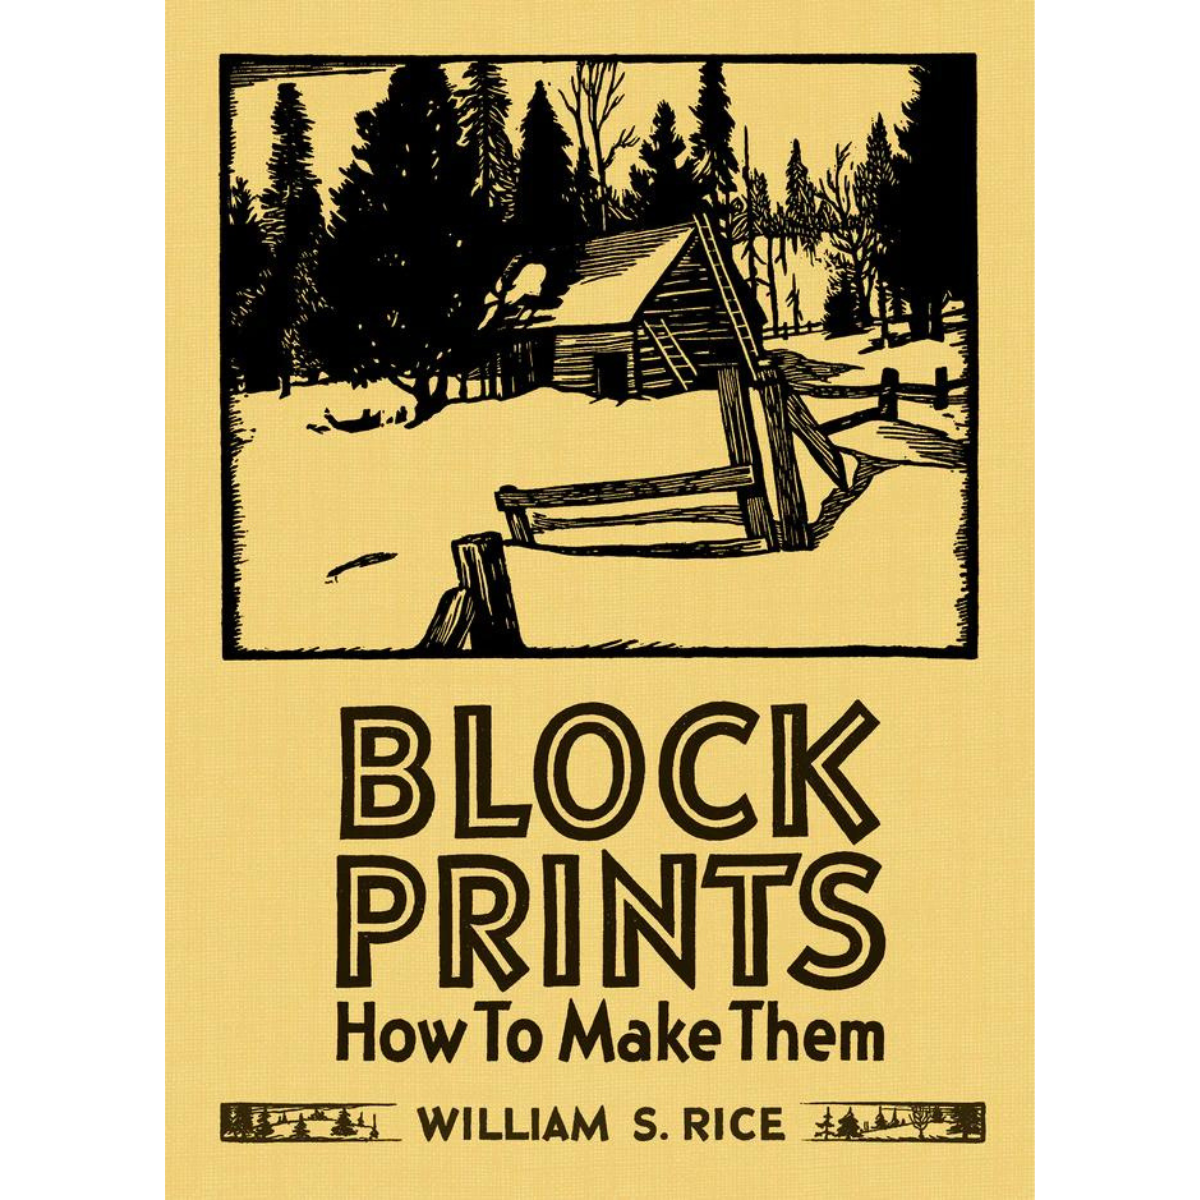 Block Prints: How To Make Them, by William S. Rice